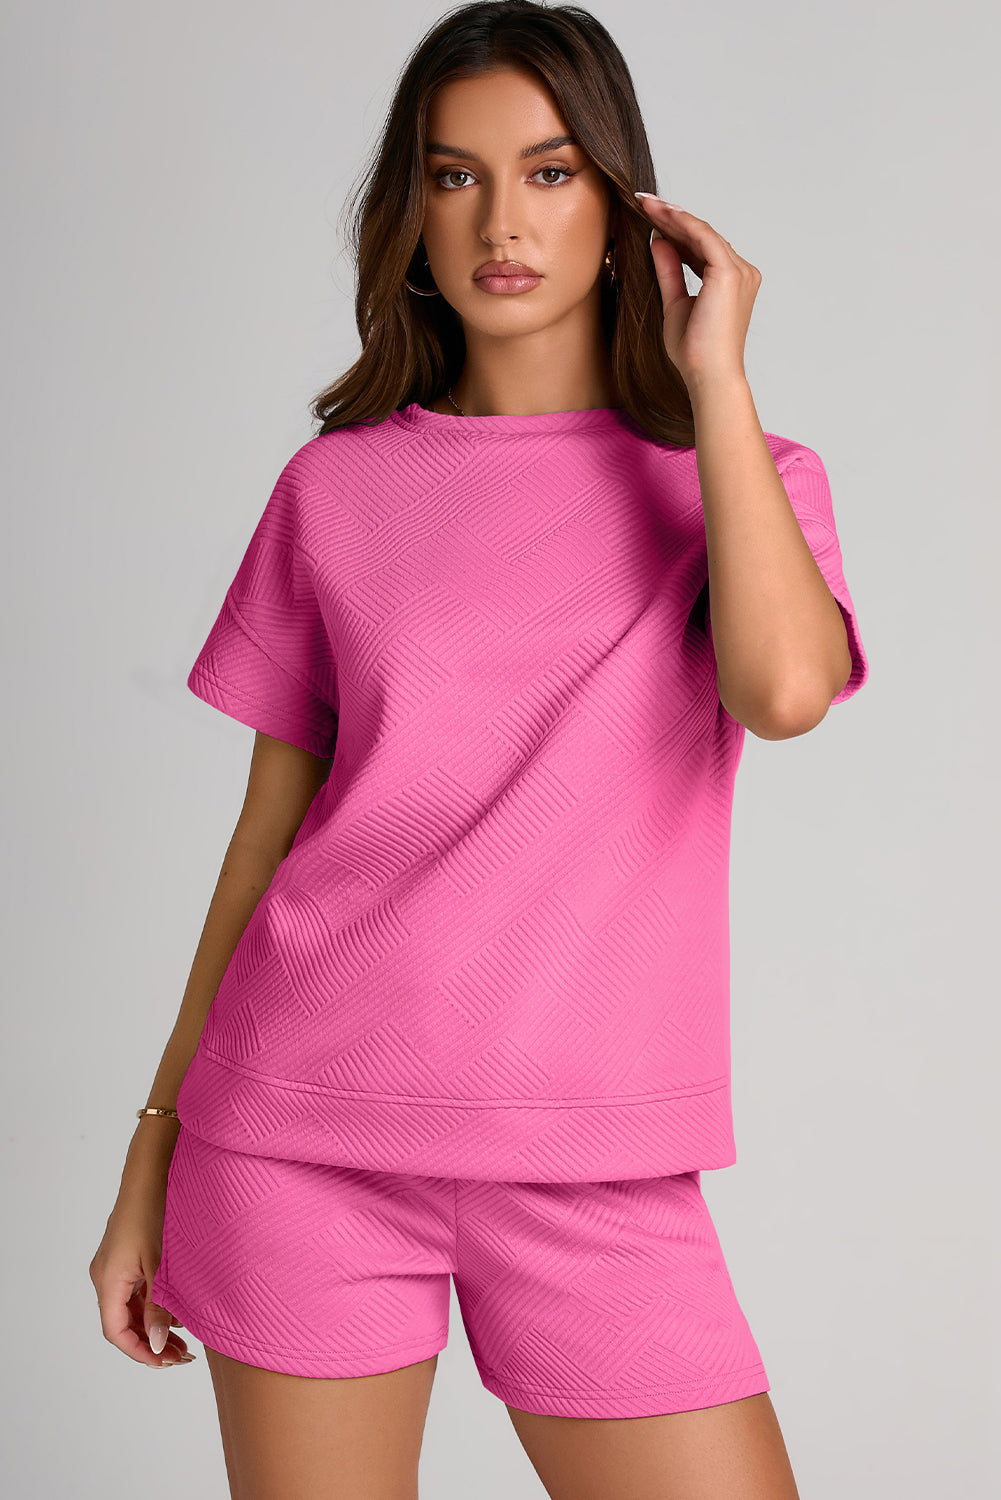 Textured Round Neck T-Shirt and Shorts Set - Fuchsia Pink / L - T-Shirts - Outfit Sets - 9 - 2024